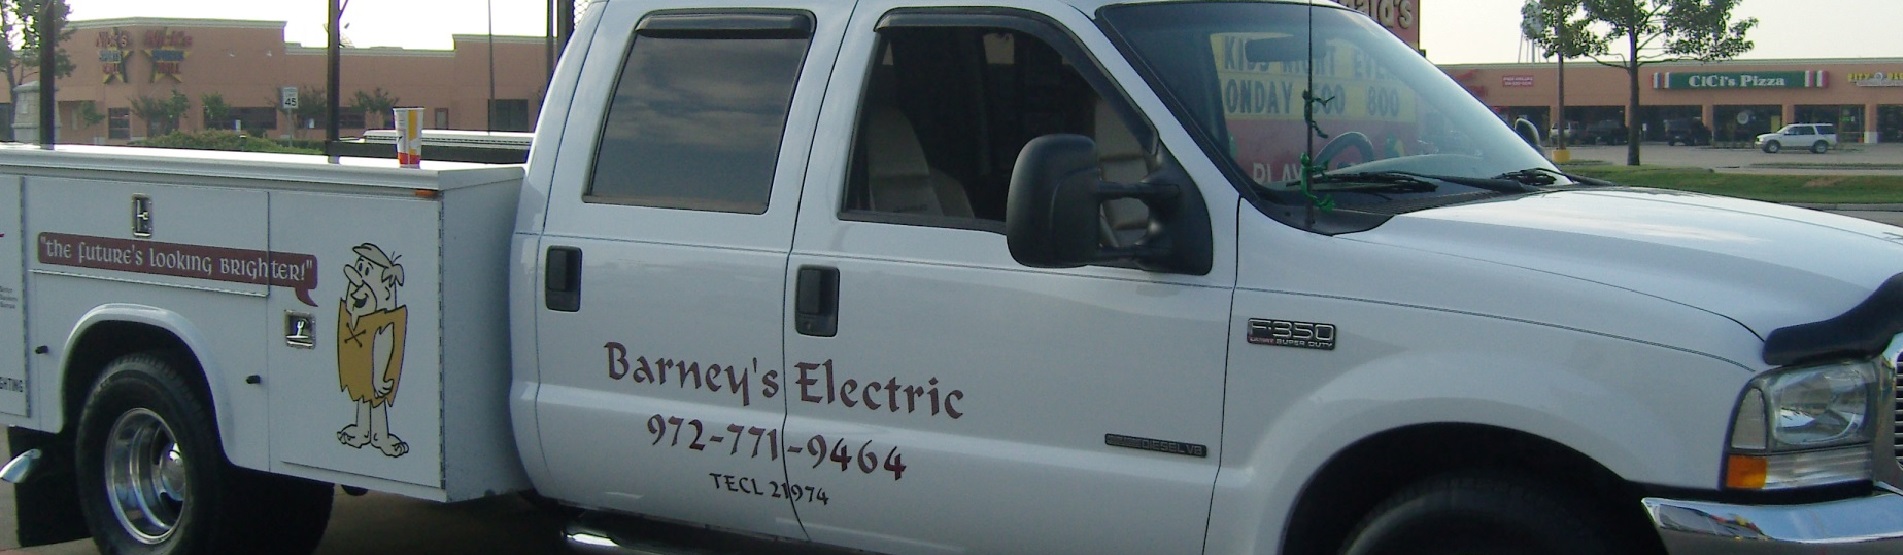 Electrician Richardson TX Barney's Electric Full Service Electrician Residential Commercial Retail and New Construction Wiring Repair Installation Service 24 Hour Emergency Services Master Electrician Rockwall Texas